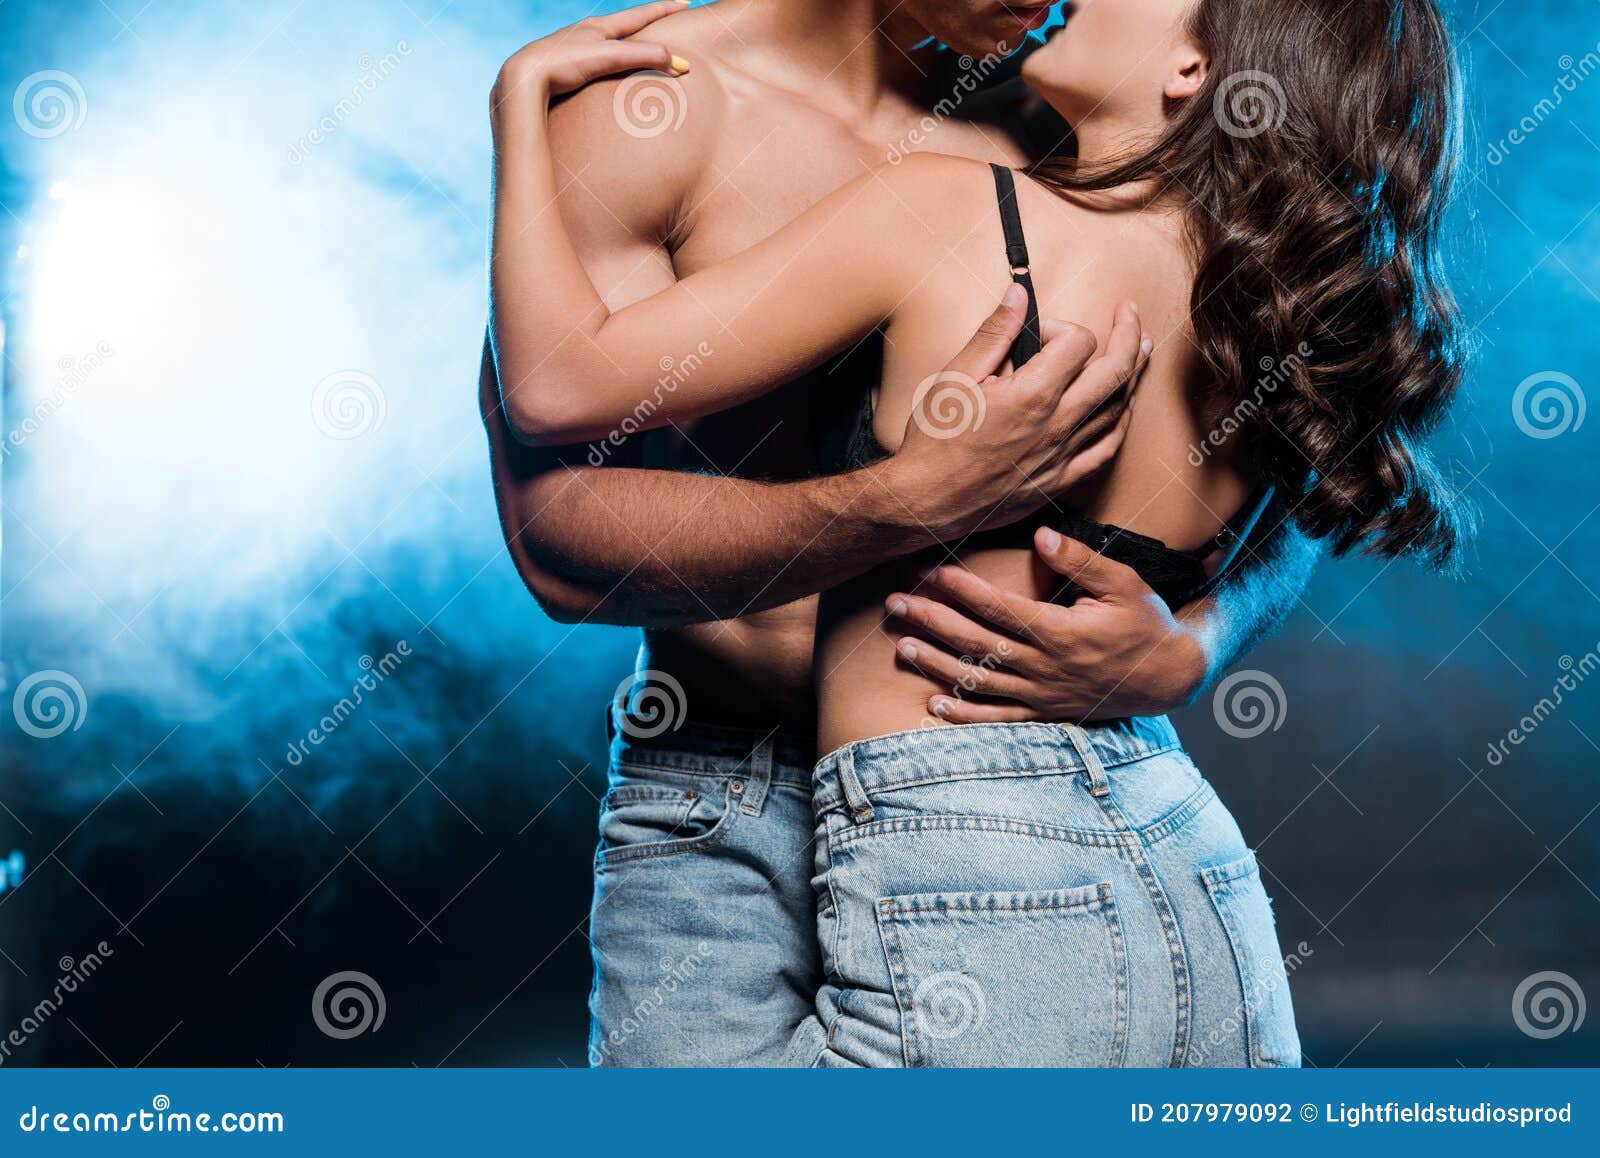 Shirtless Man Hugging Young Woman Standing in Lace Bra on Blue